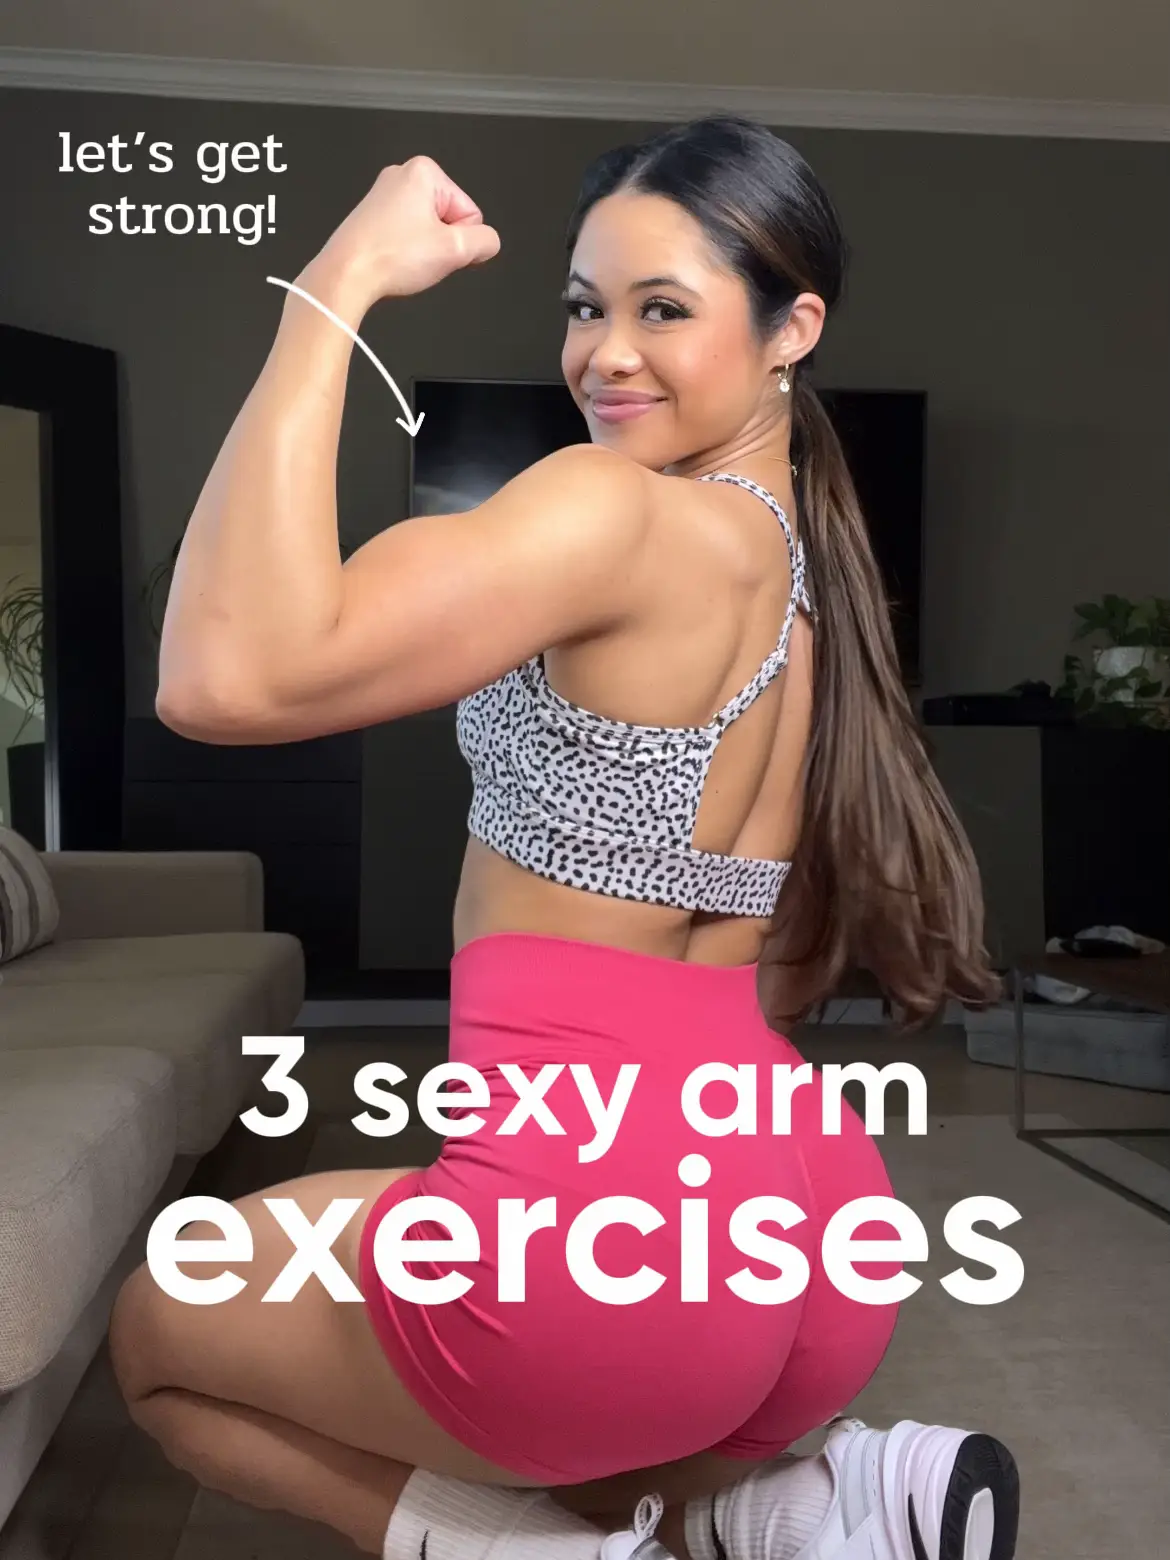 Factsoftraining - 8 Easy Exercises for Super-Toned Arms 💪